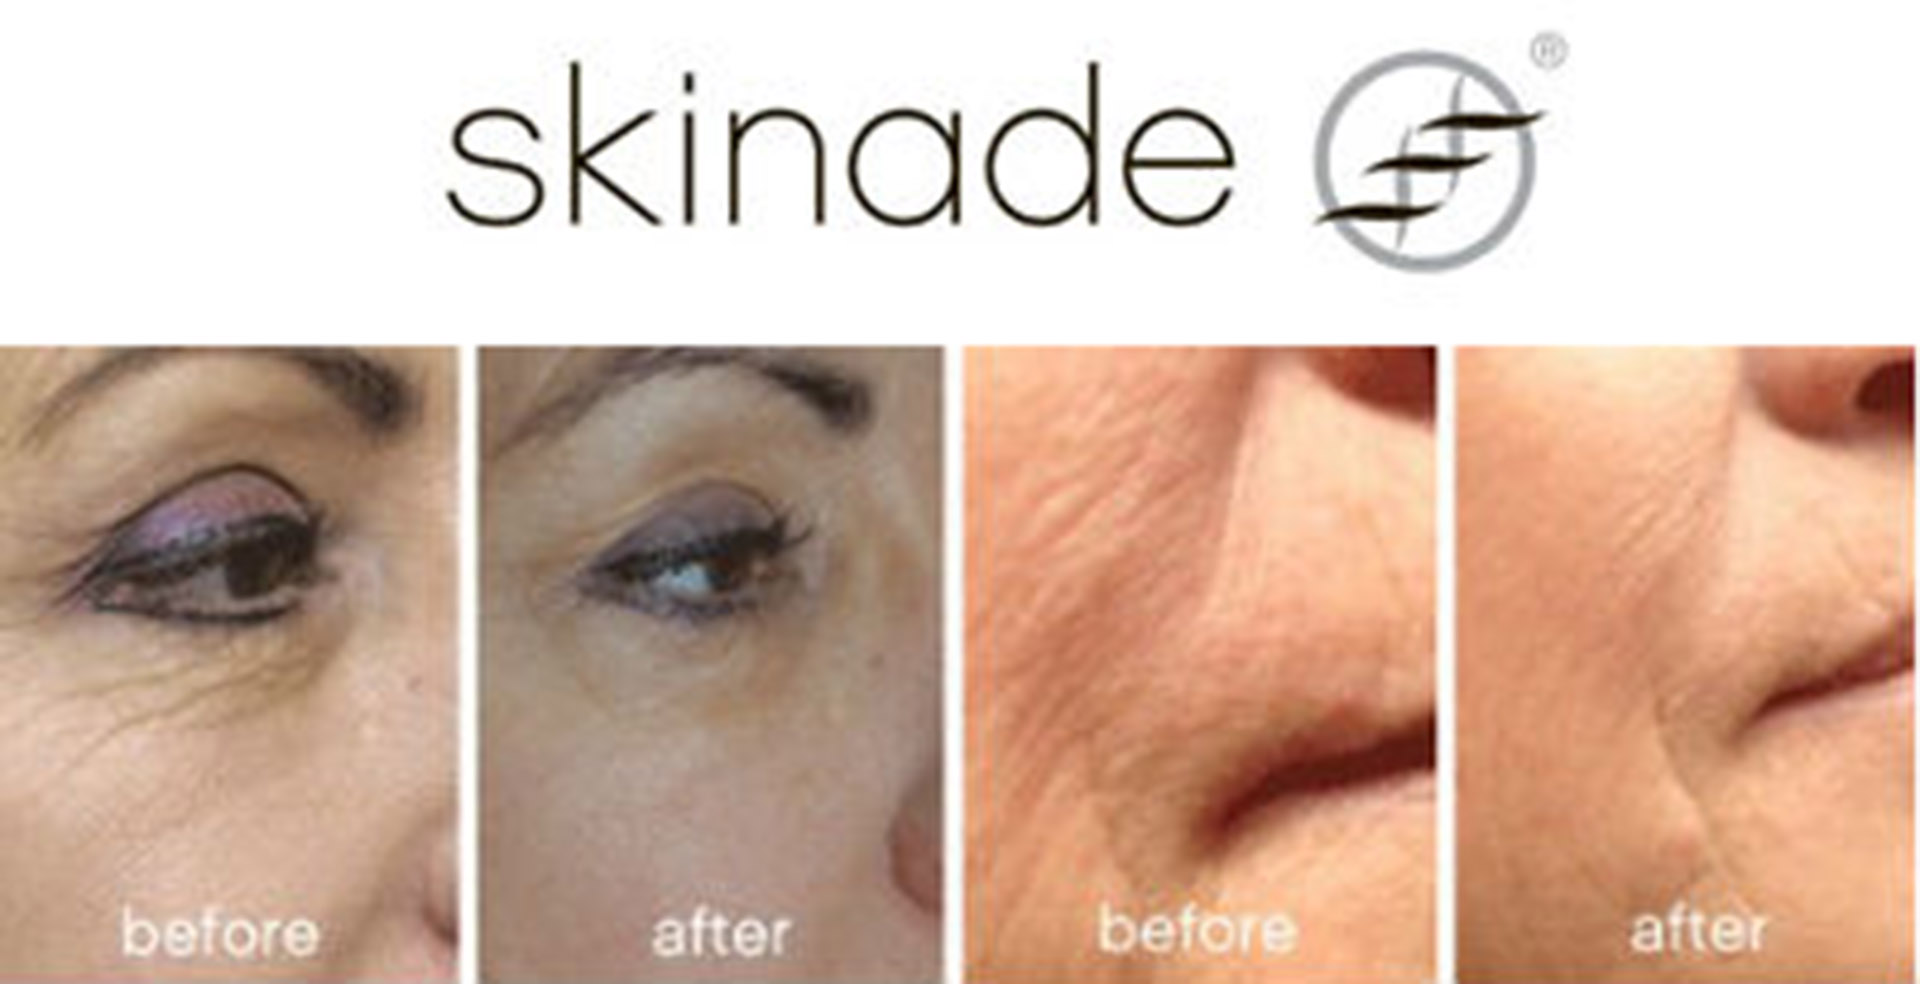 Skinade – One Way Solution For Your Skin